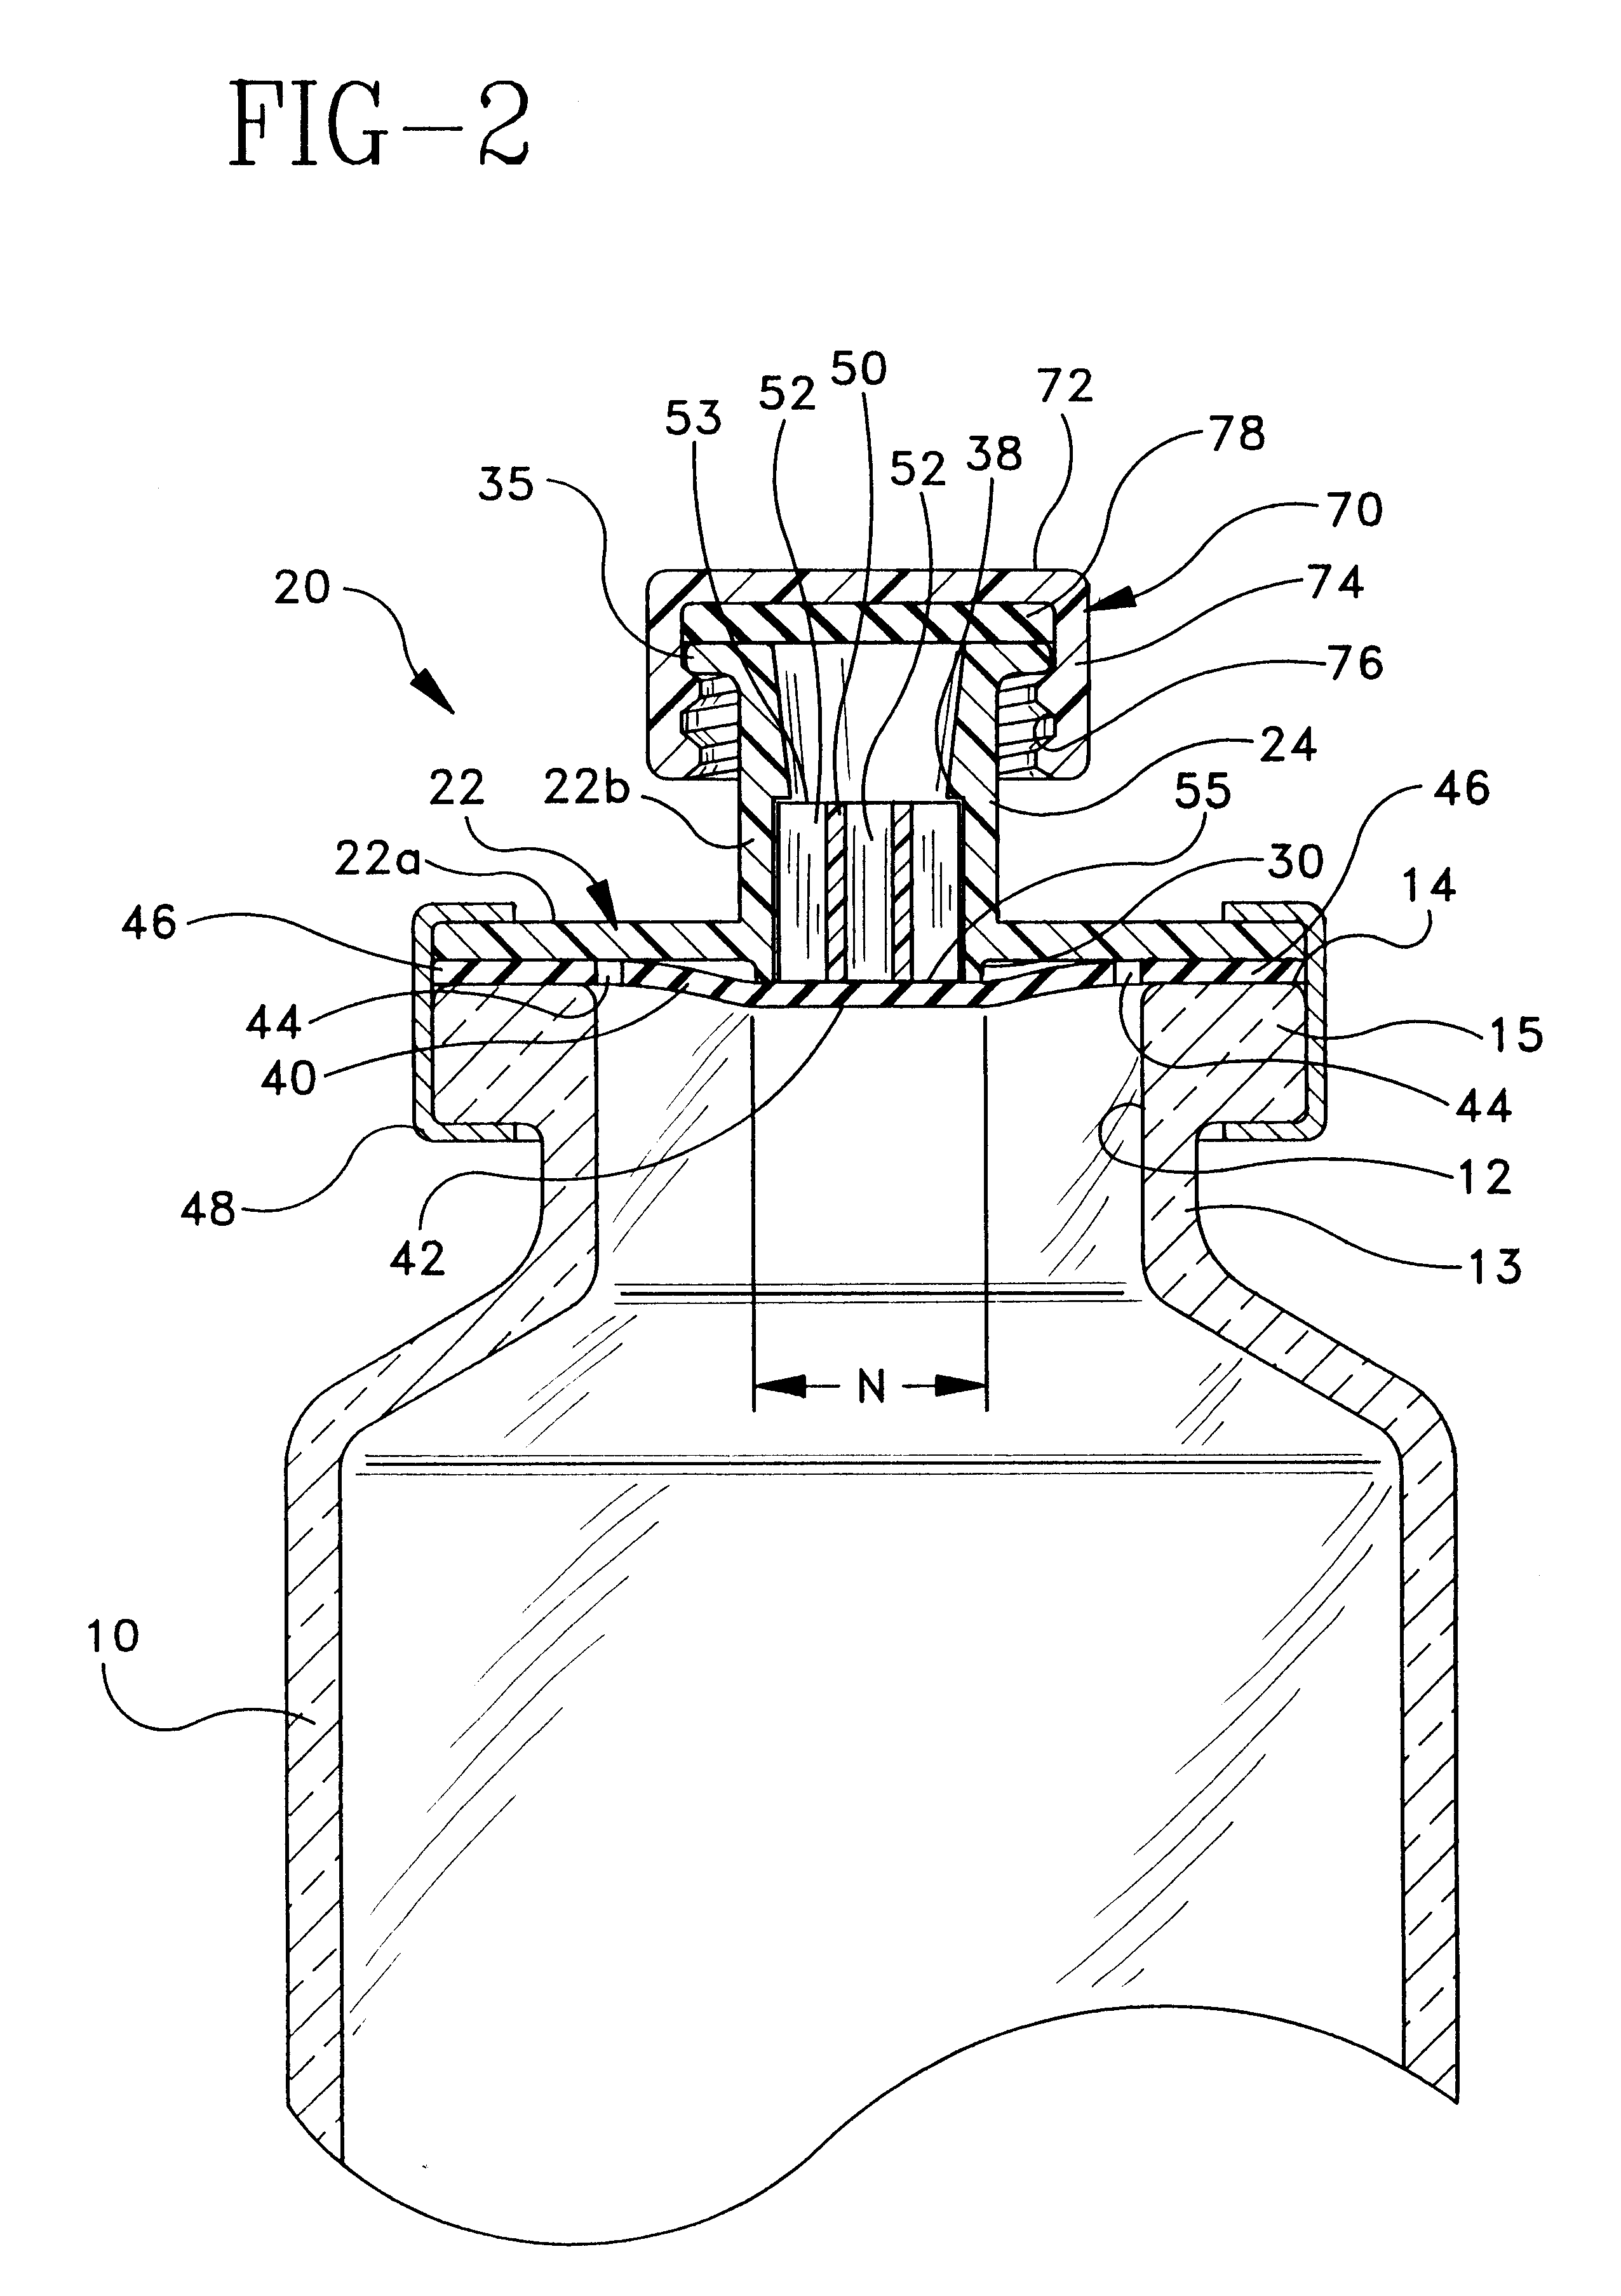 Resealable vial with connector assembly having a membrane and pusher